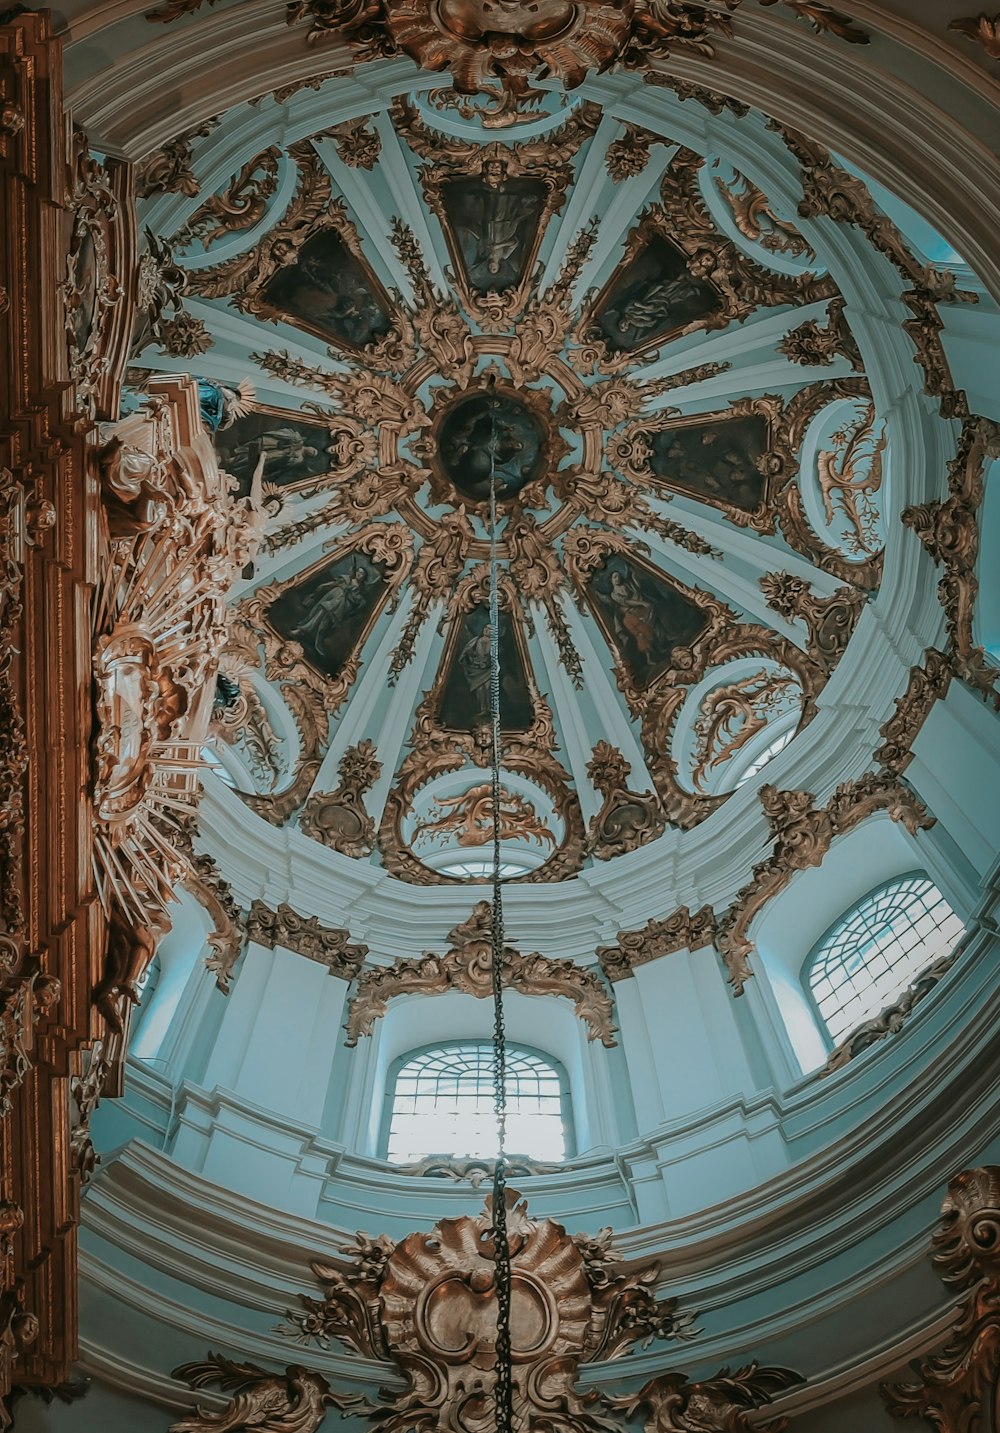 the ceiling of a large building with a clock on it